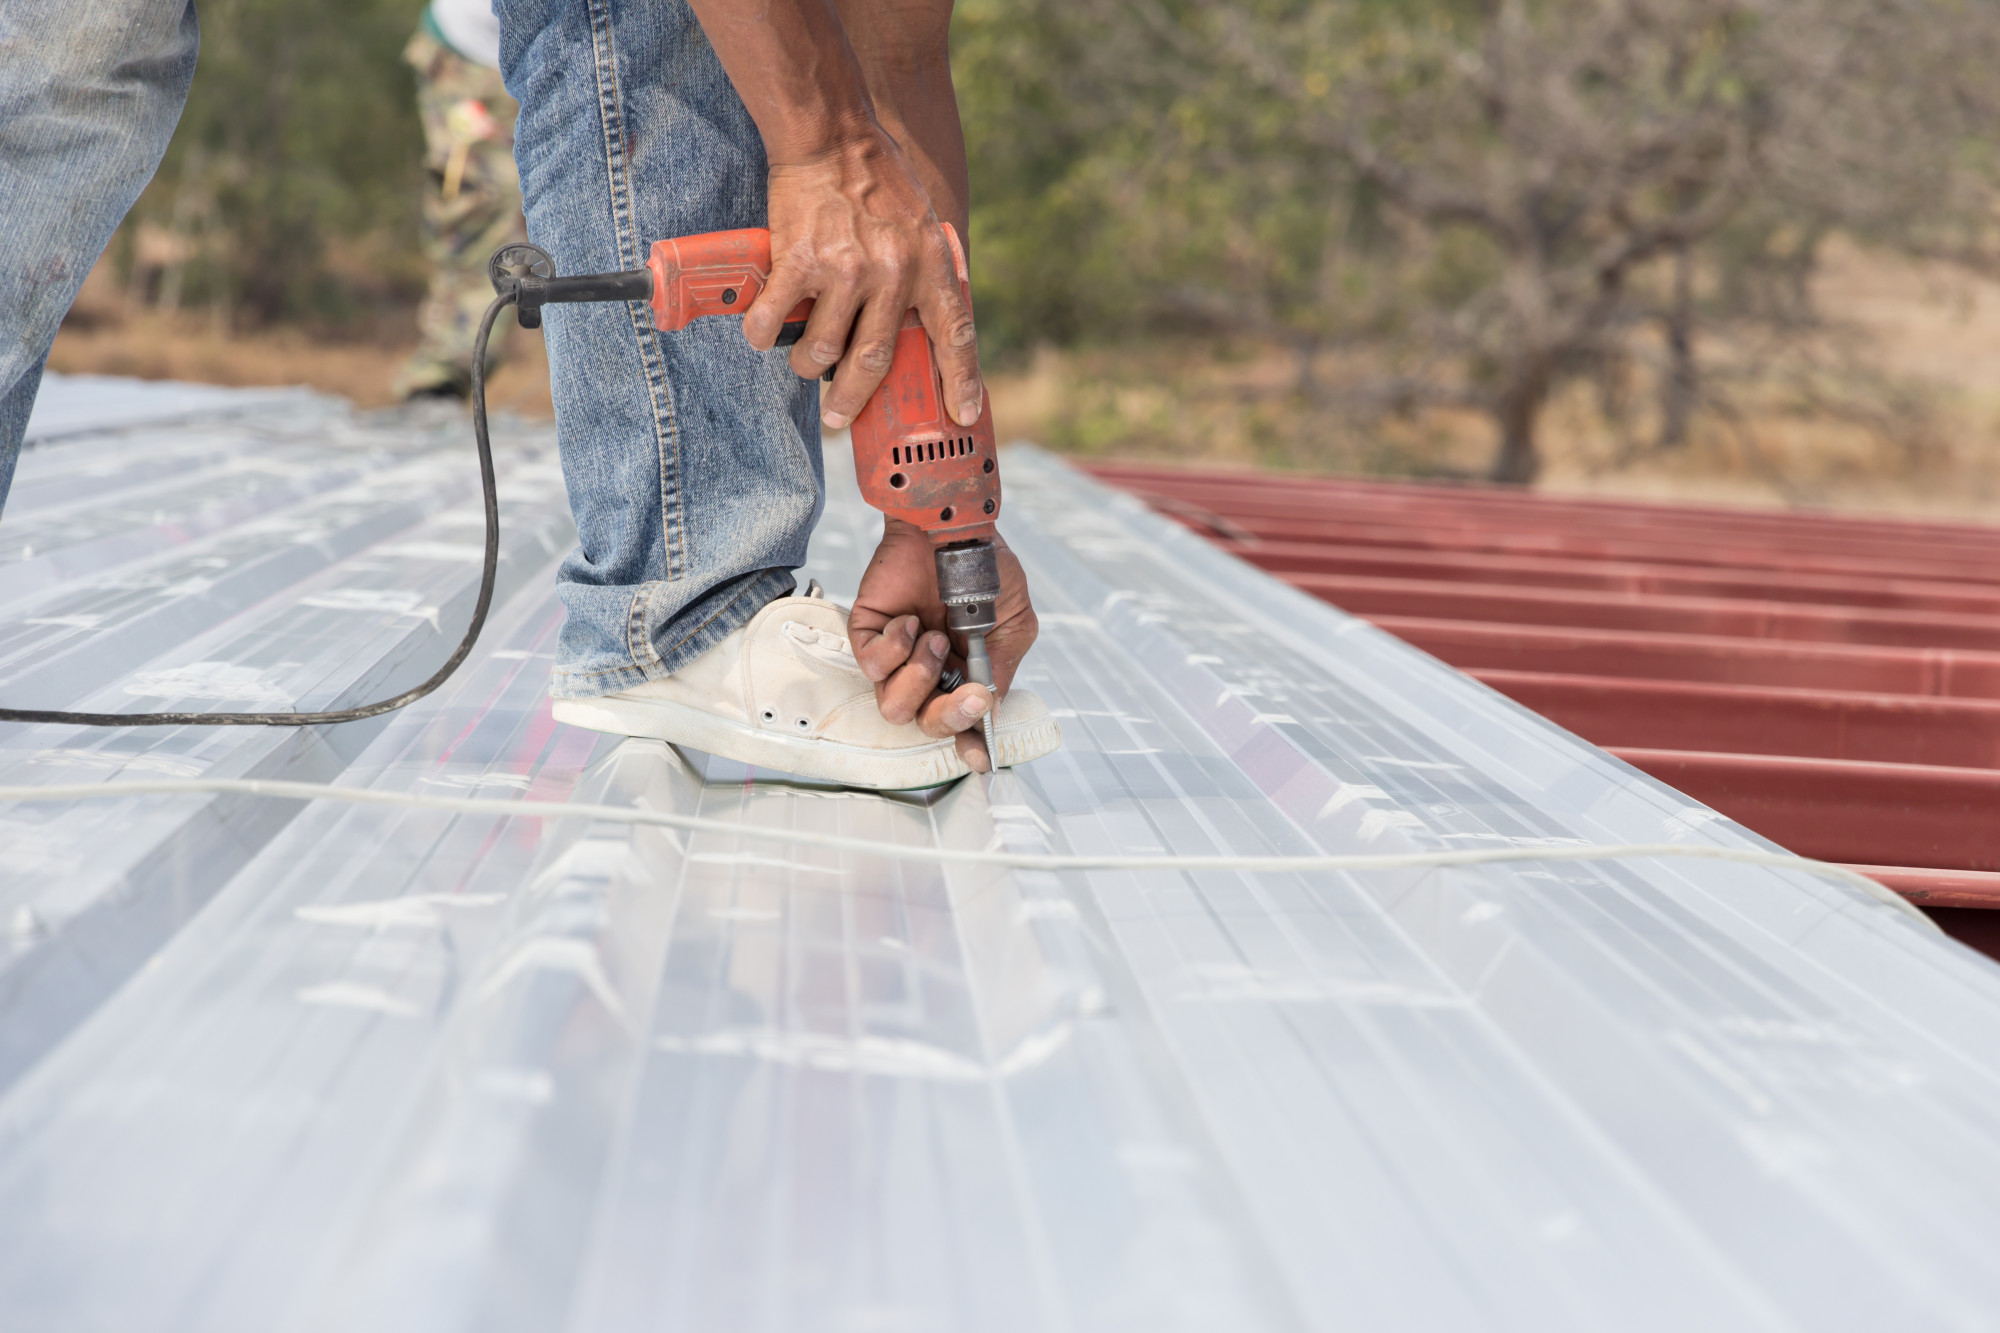 4 Things to Consider When Choosing the Best Roofing Material